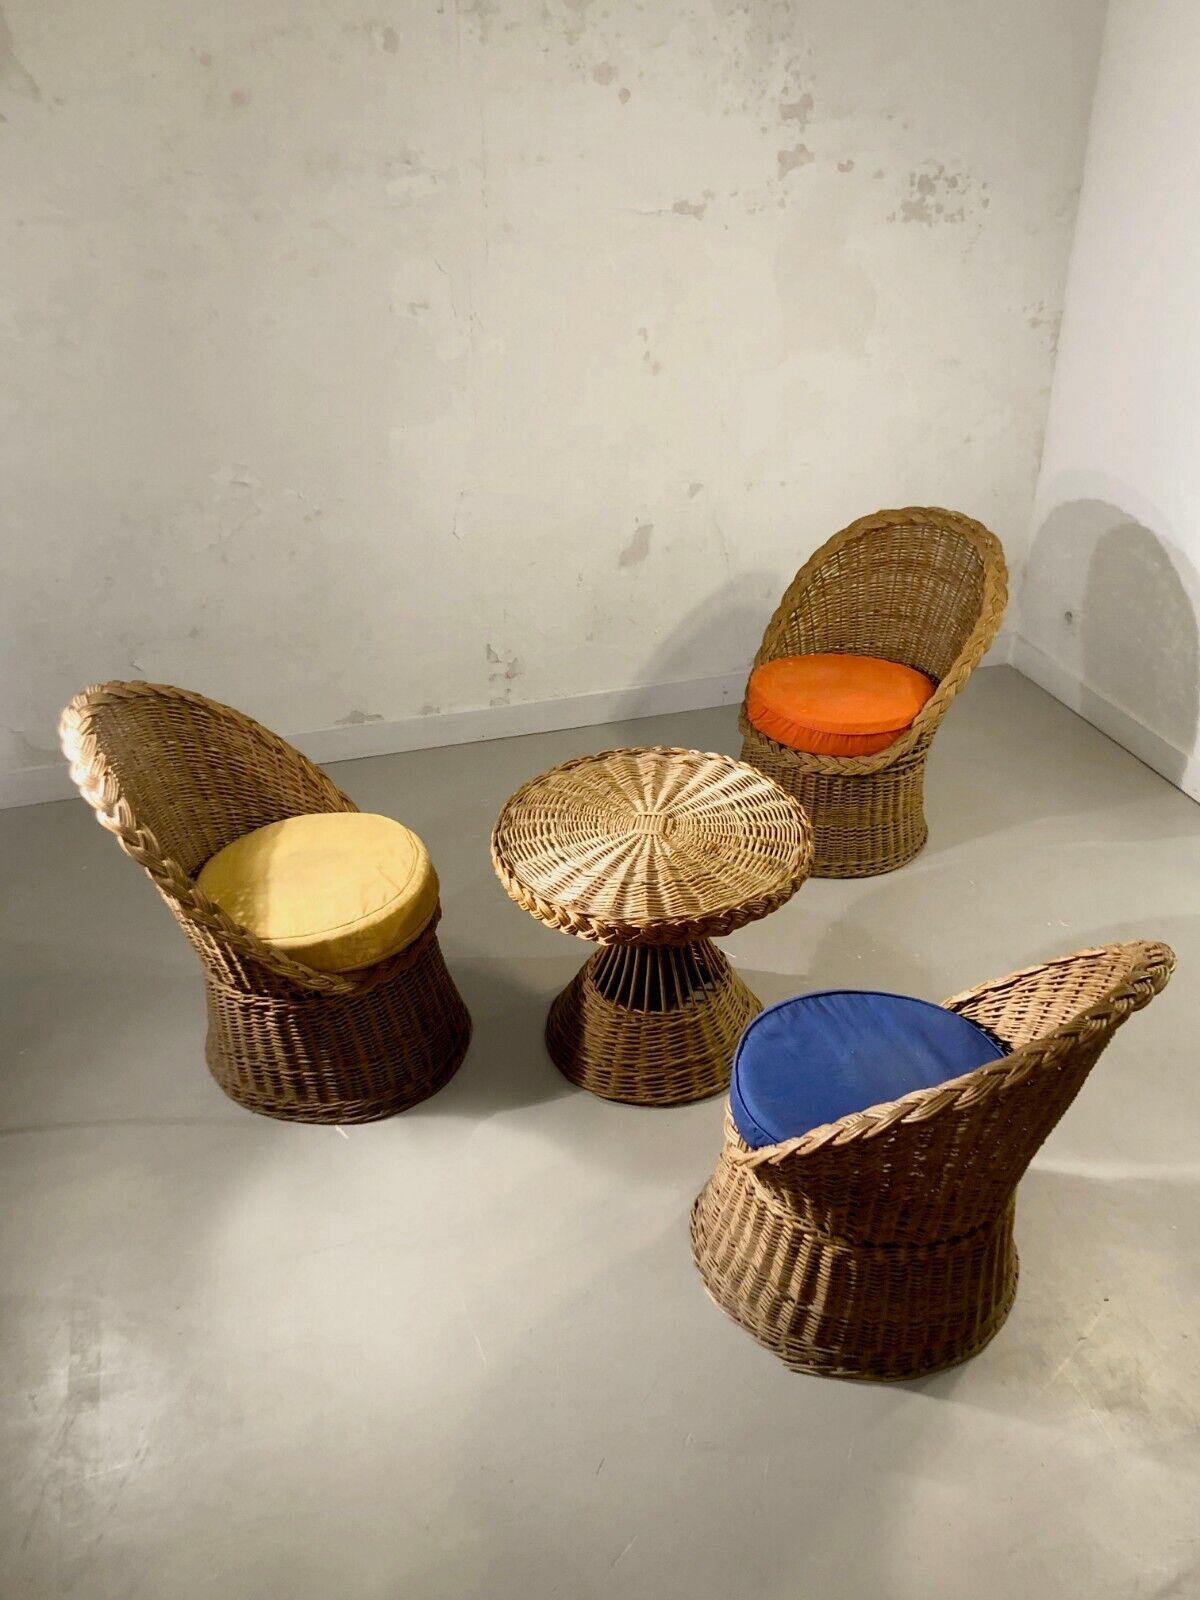 A small summer lounge for a terrace, Modernist, Free Form, Reconstruction, including 3 armchairs in woven rattan with original circular seats in primary colors red, blue, yellow, and a small openwork diabolo table in woven rattan, to be attributed,